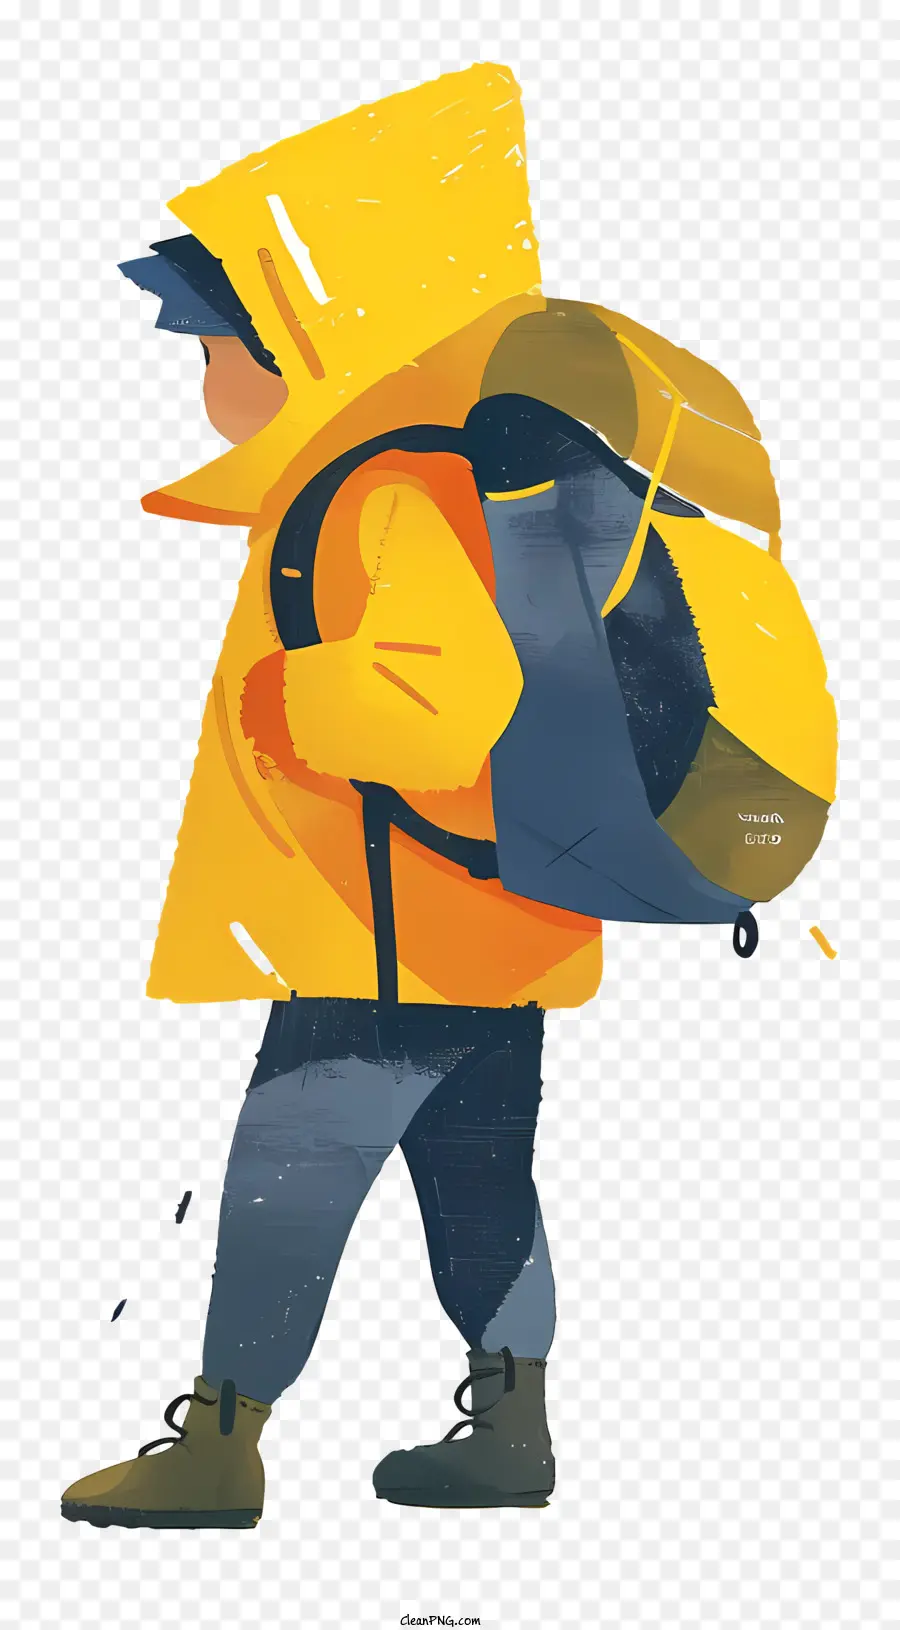 boy with backpack cartoon illustration man in yellow raincoat backpack determined expression